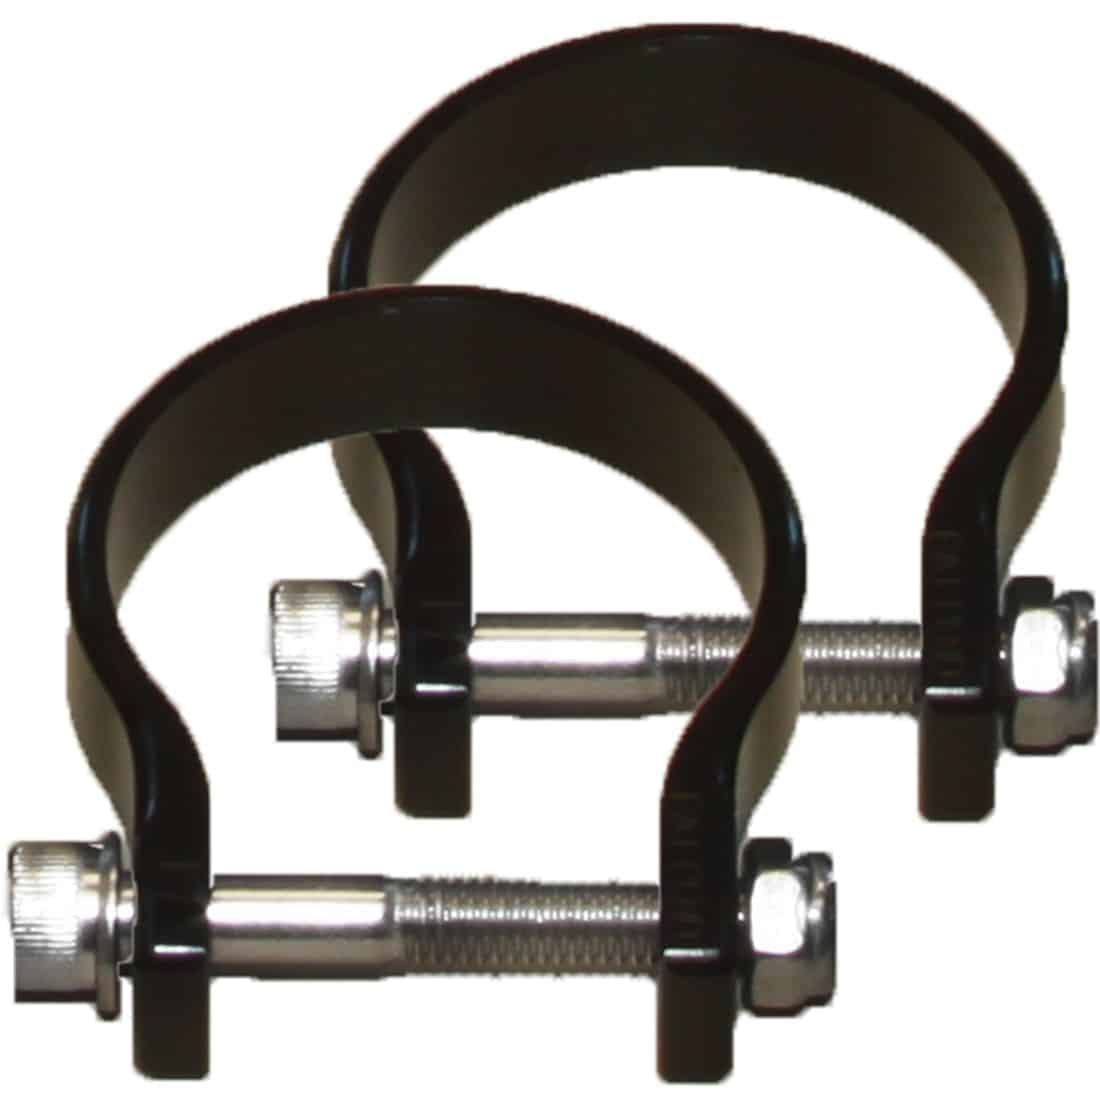 1.75 Inch Bar Clamp Fits E-Series and SR-Series RIGID Lighting 47520